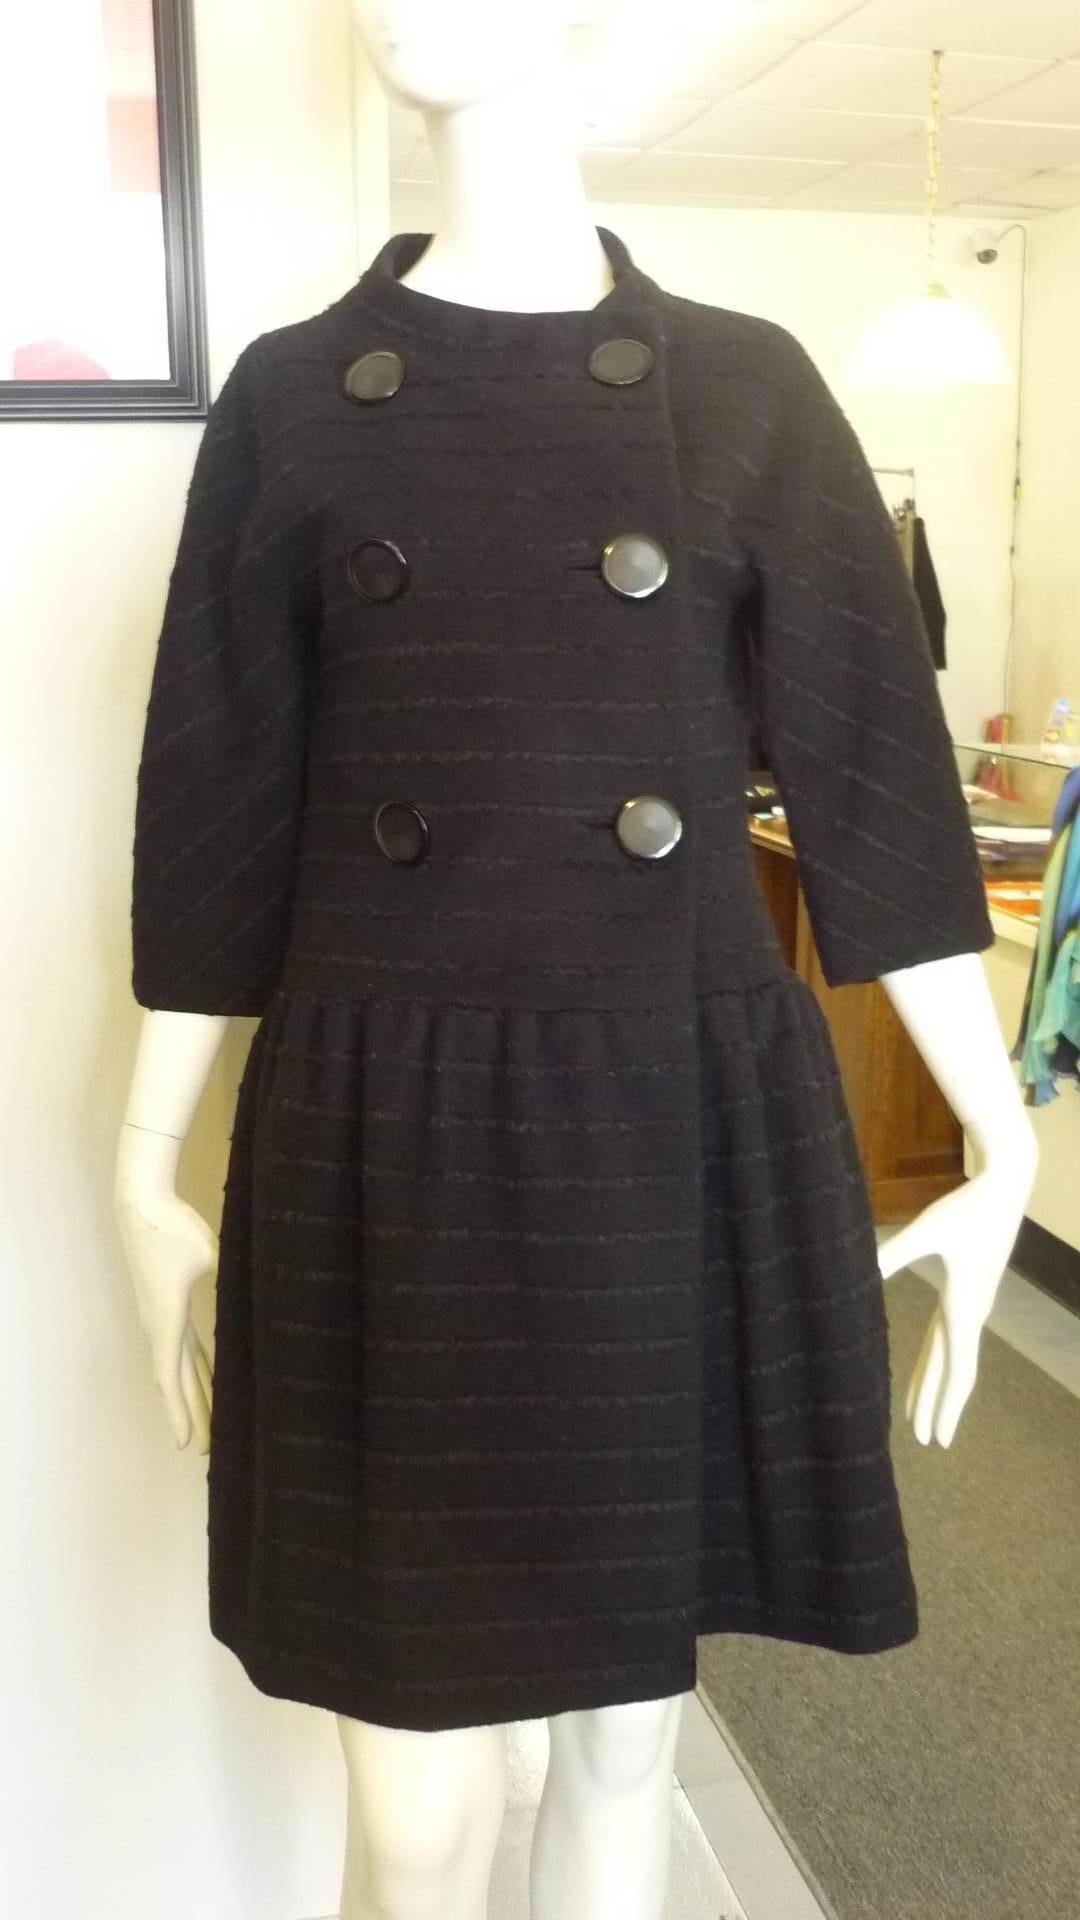 This is a collection worthy coat and it has been marked as in good condition because of small tear in the lining at the armpits. Otherwise this coat is in remarkable condition for its age.

It is double breasted; has a slightly round assymetrical